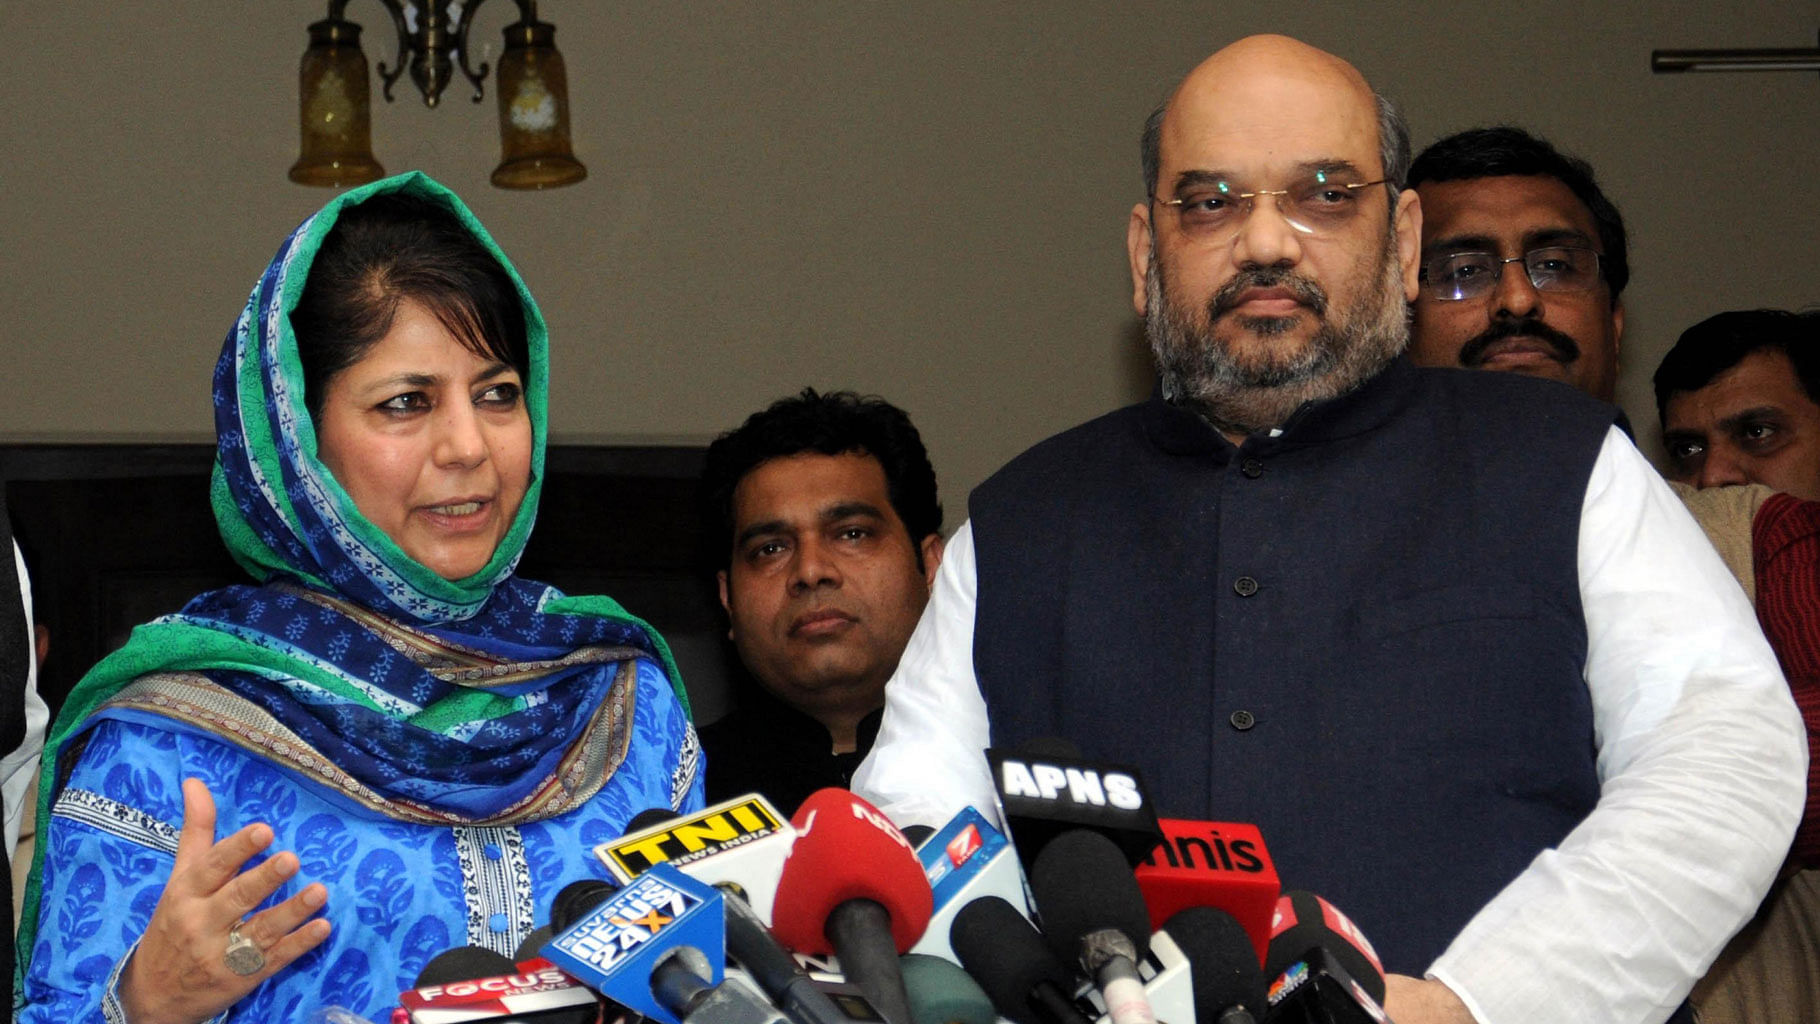 File photo of PDP leader Mehbooba Mufti and BJP Chief Amit Shah.